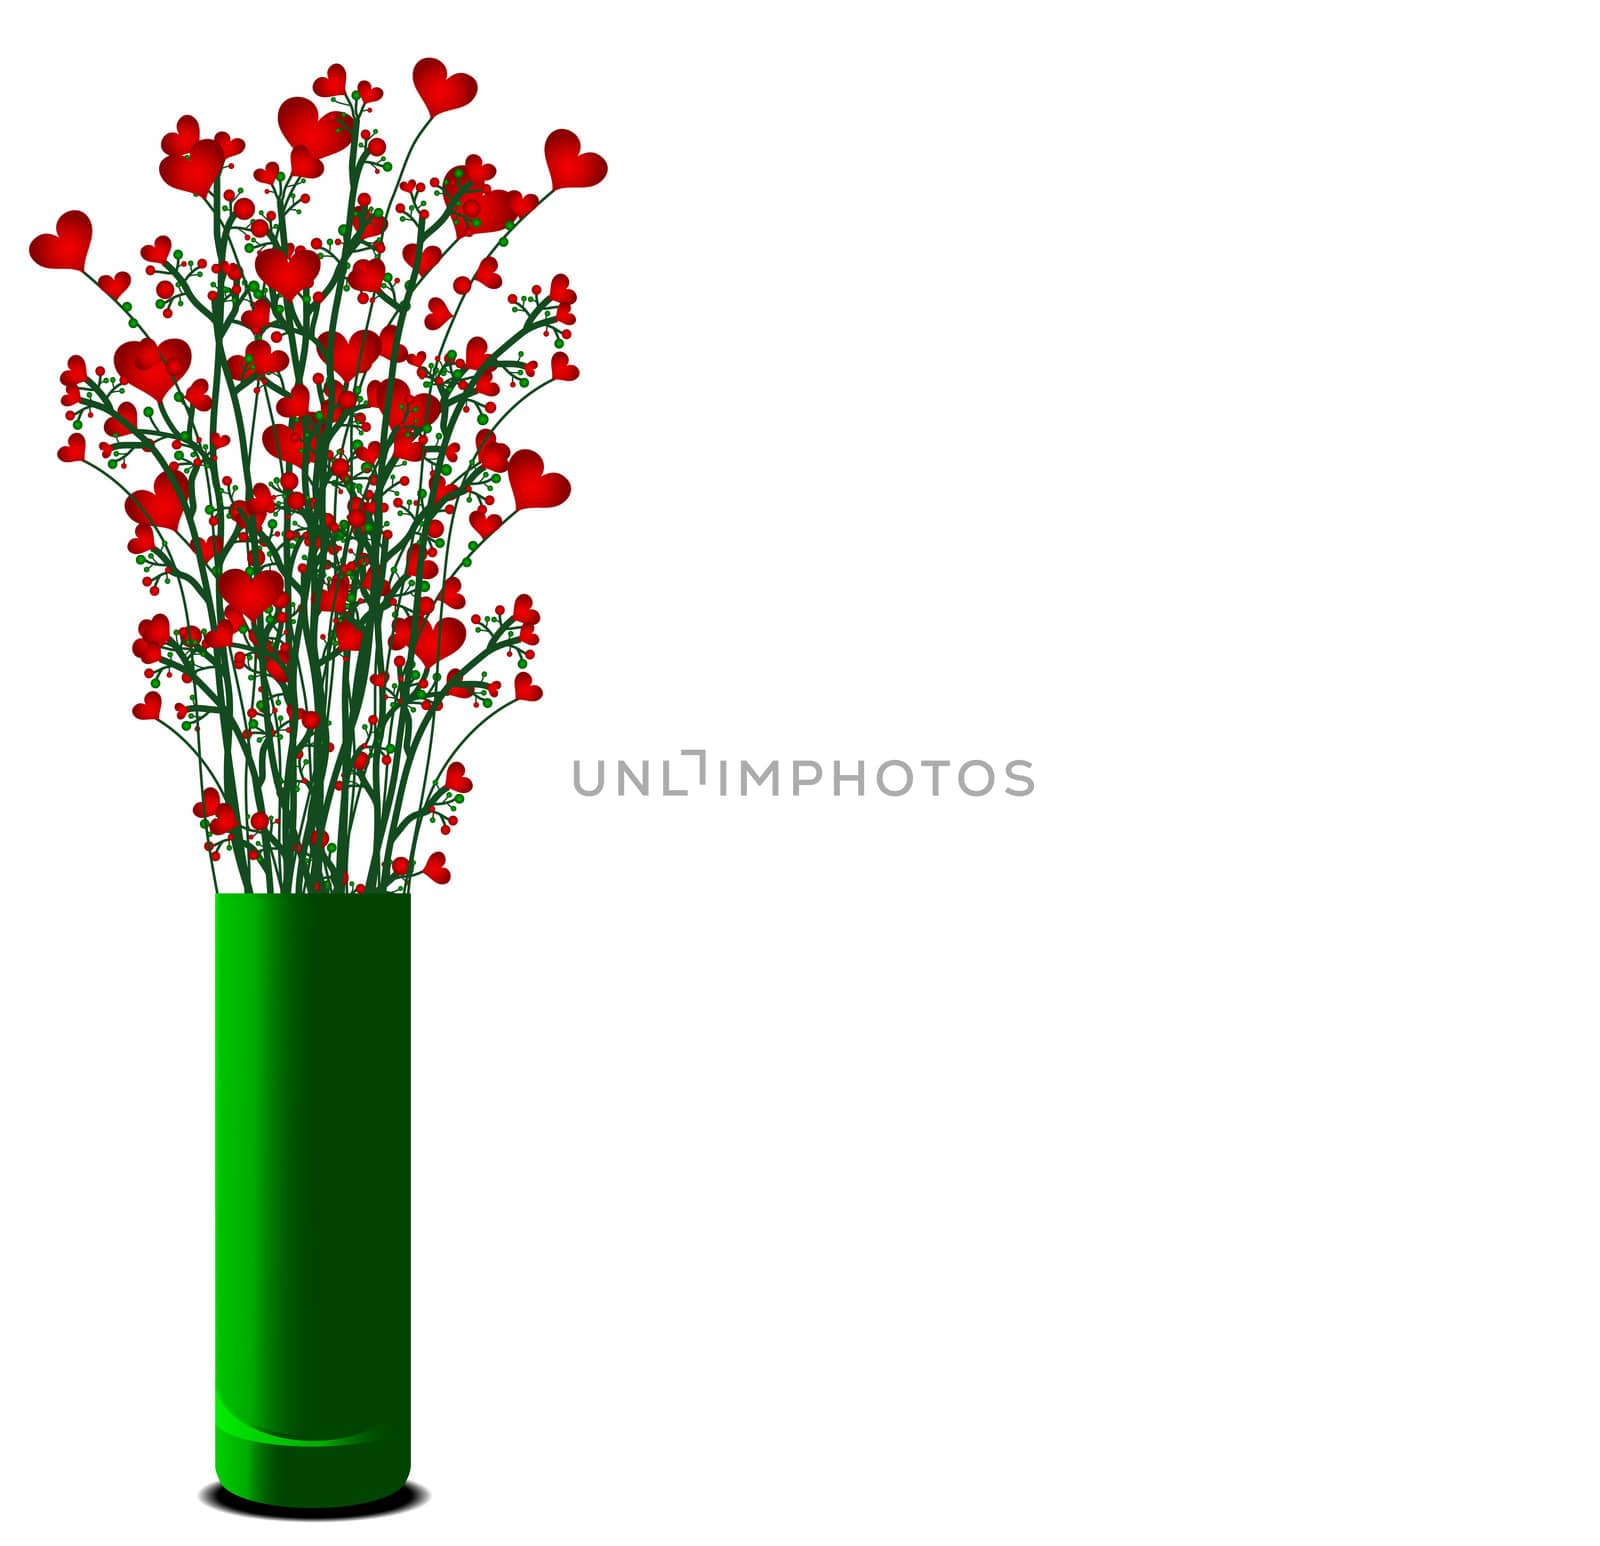 vase with red heart flowers by peromarketing